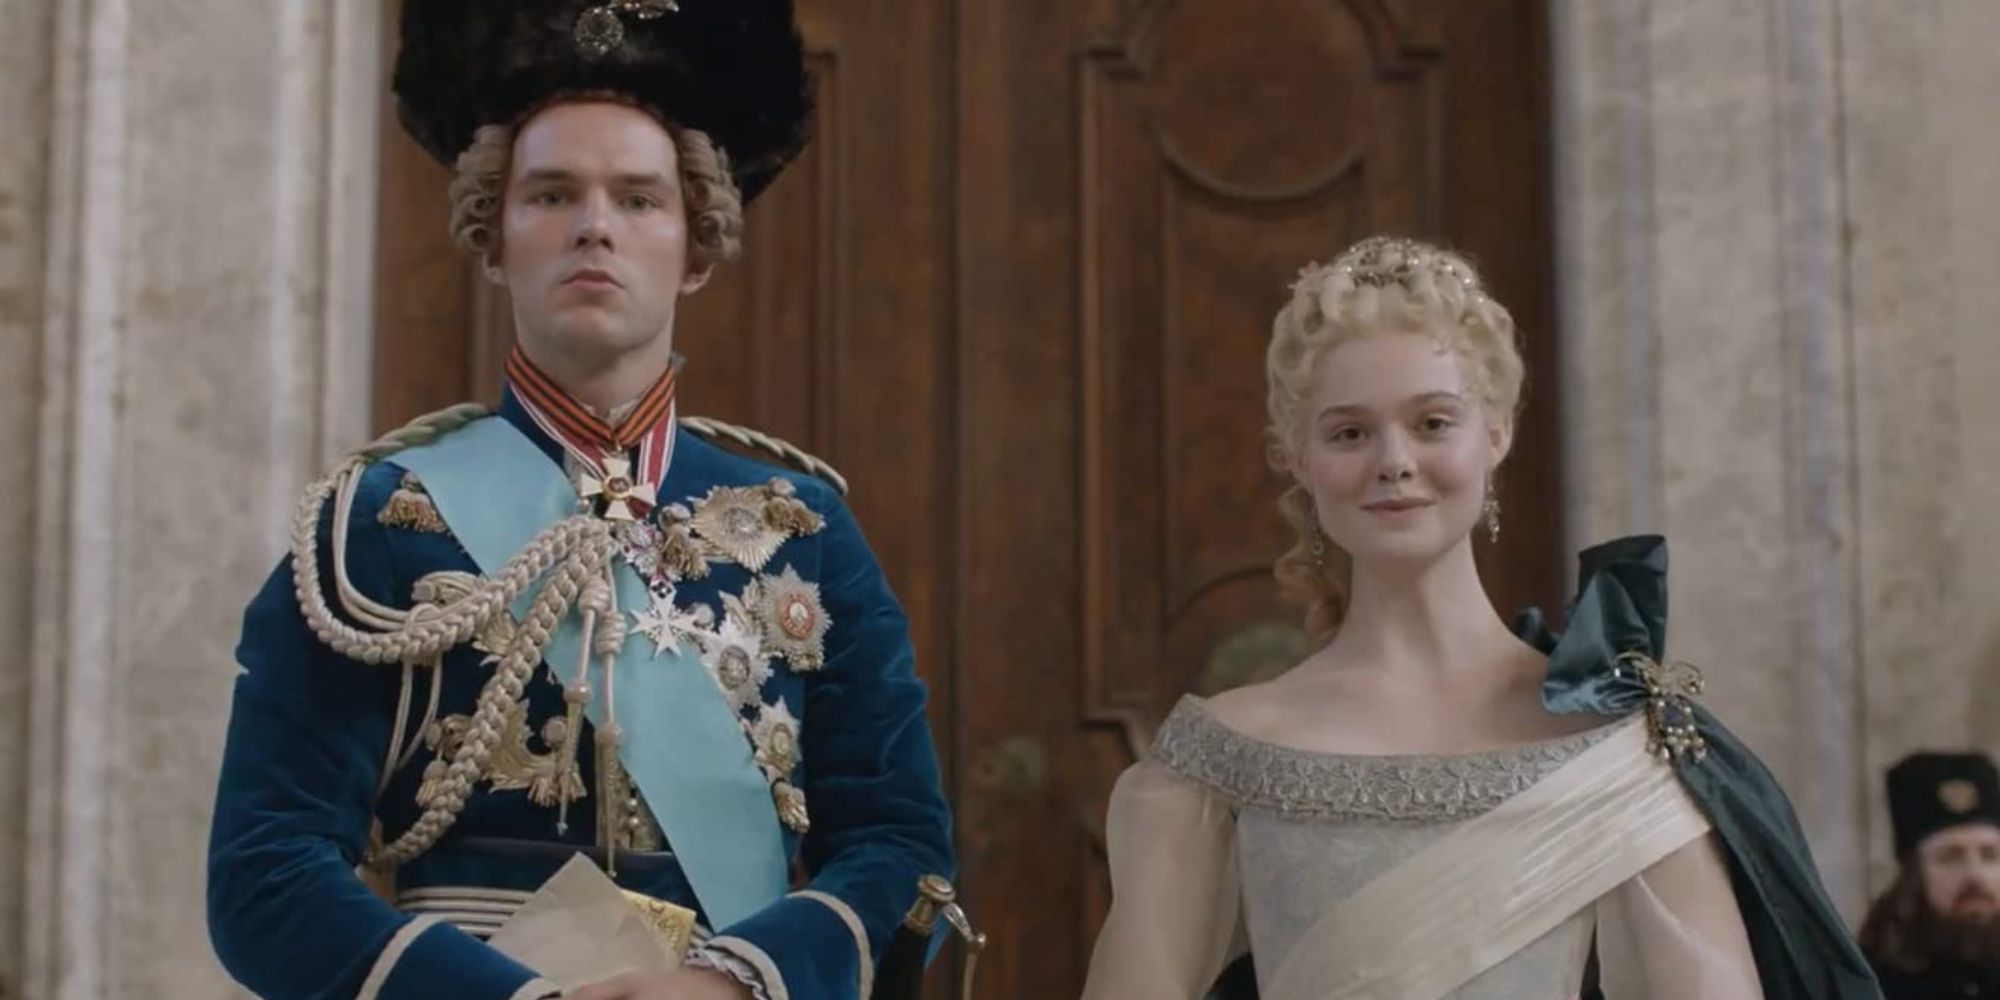 Nicholas Hoult and Elle Fanning to Play Russia's Peter and Catherine in Hulu Series 'The Great'